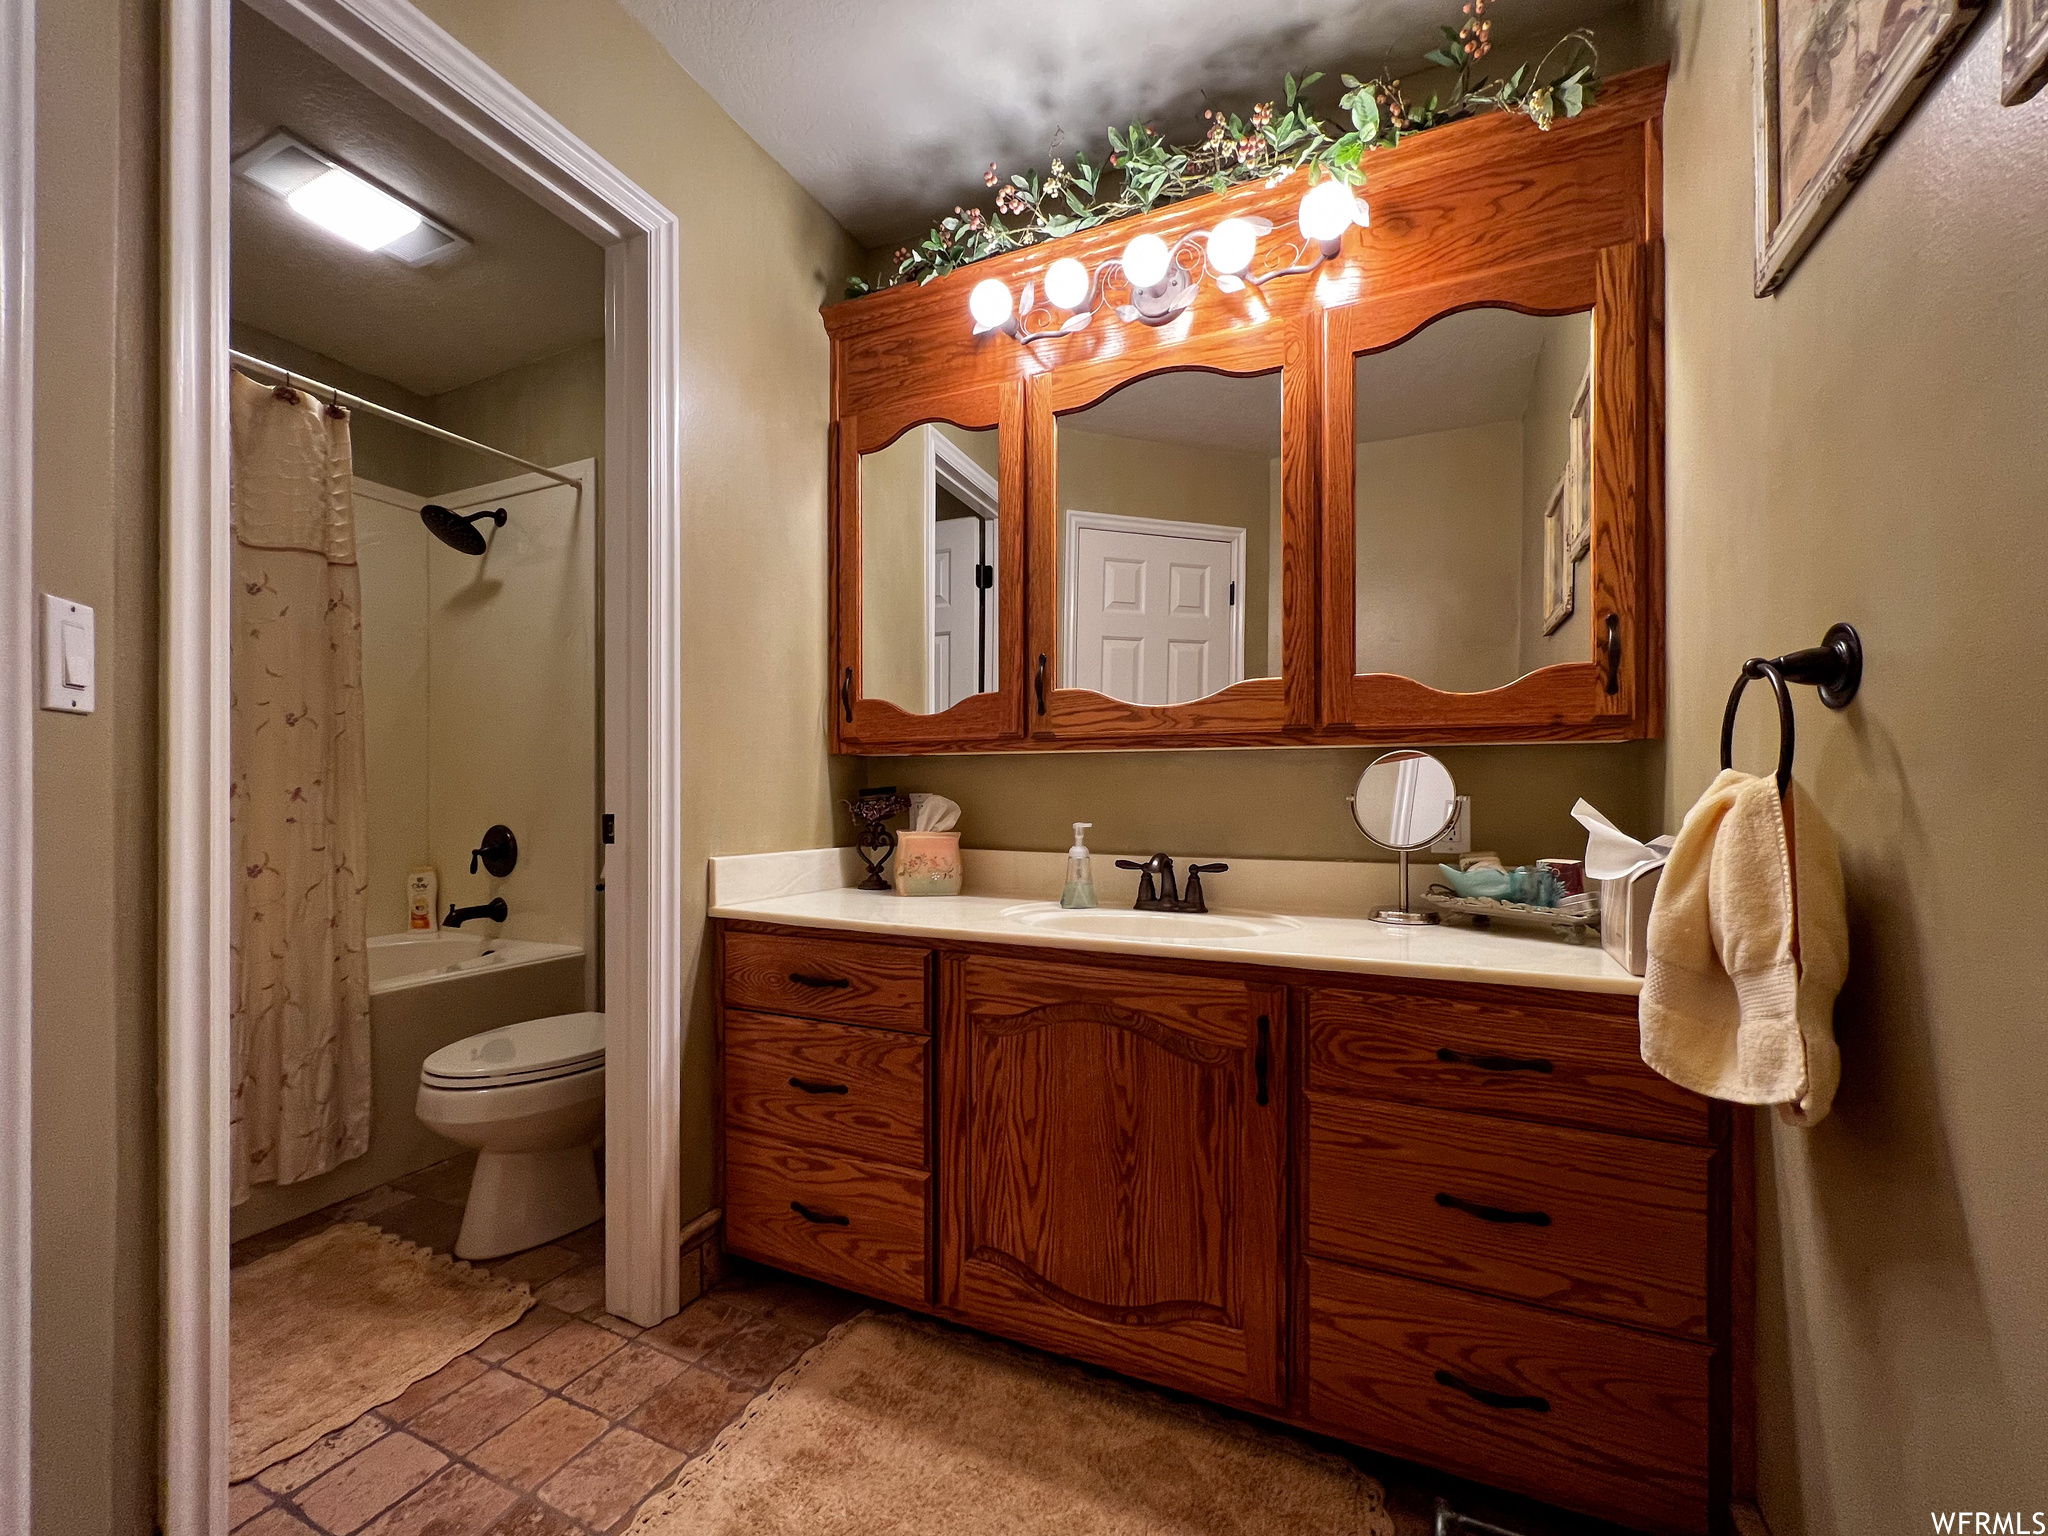 Full bathroom with tile flooring, mirror, tub / shower combination, toilet, and vanity